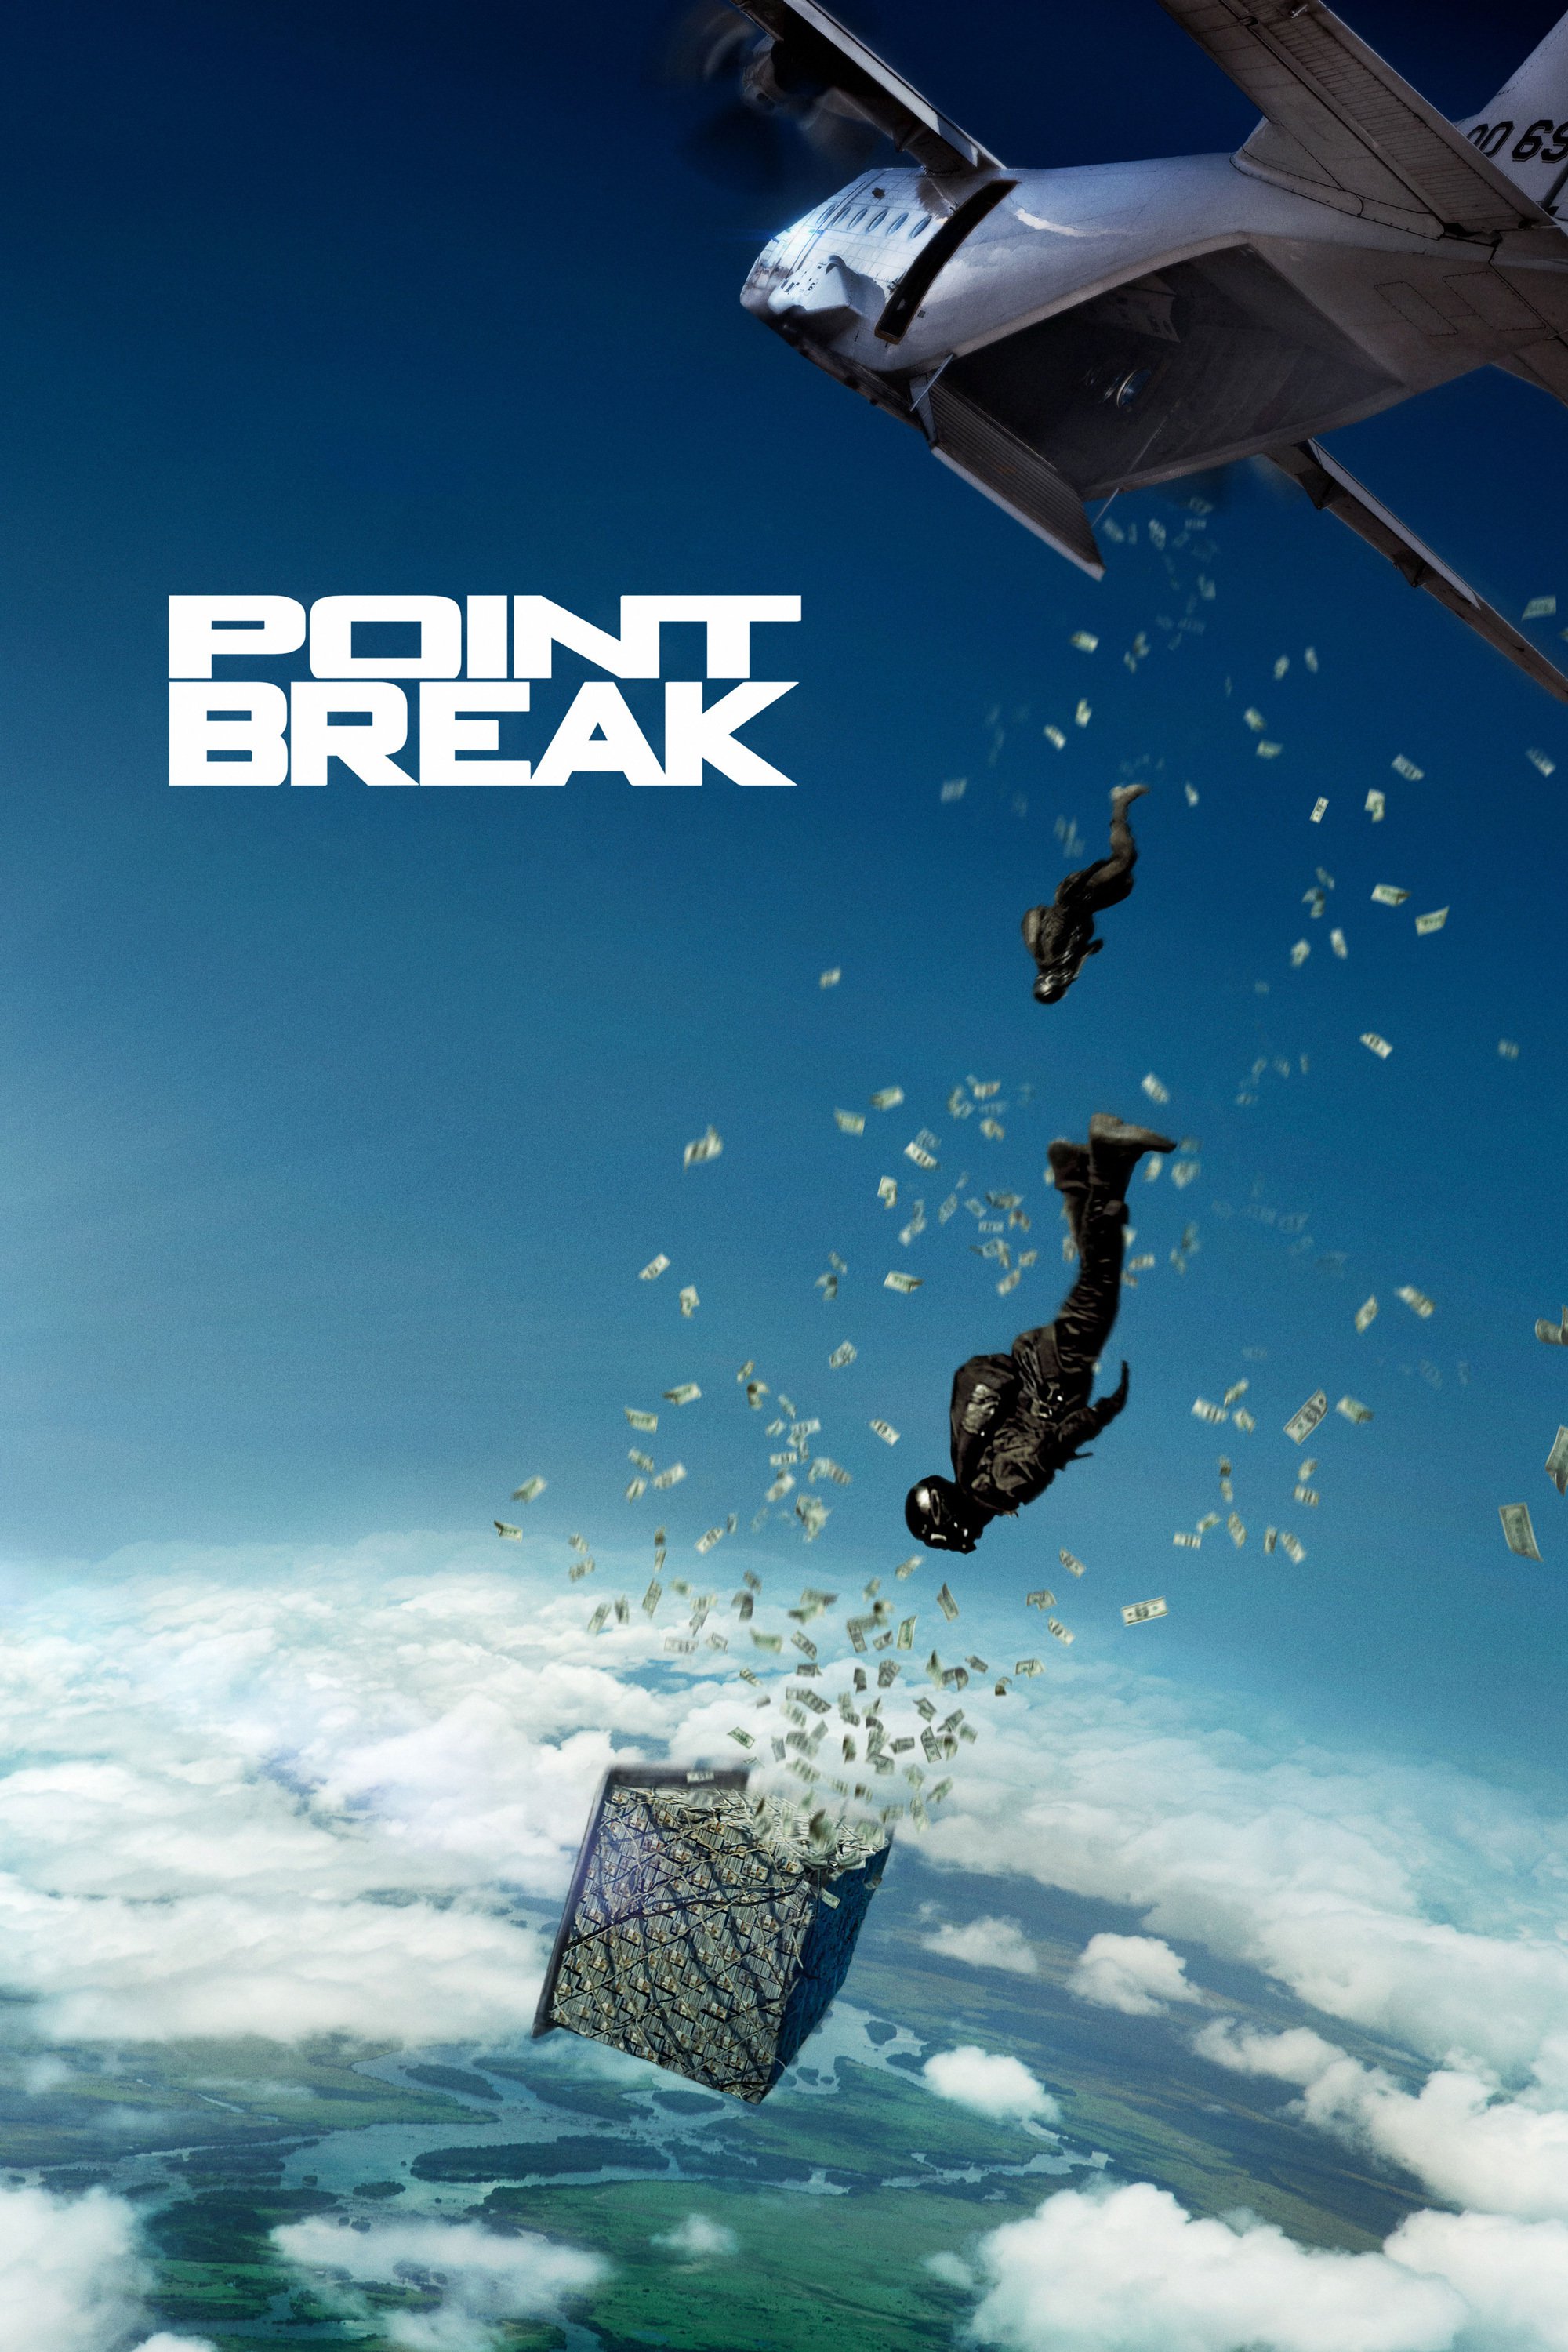 Poster for the movie "Point Break"